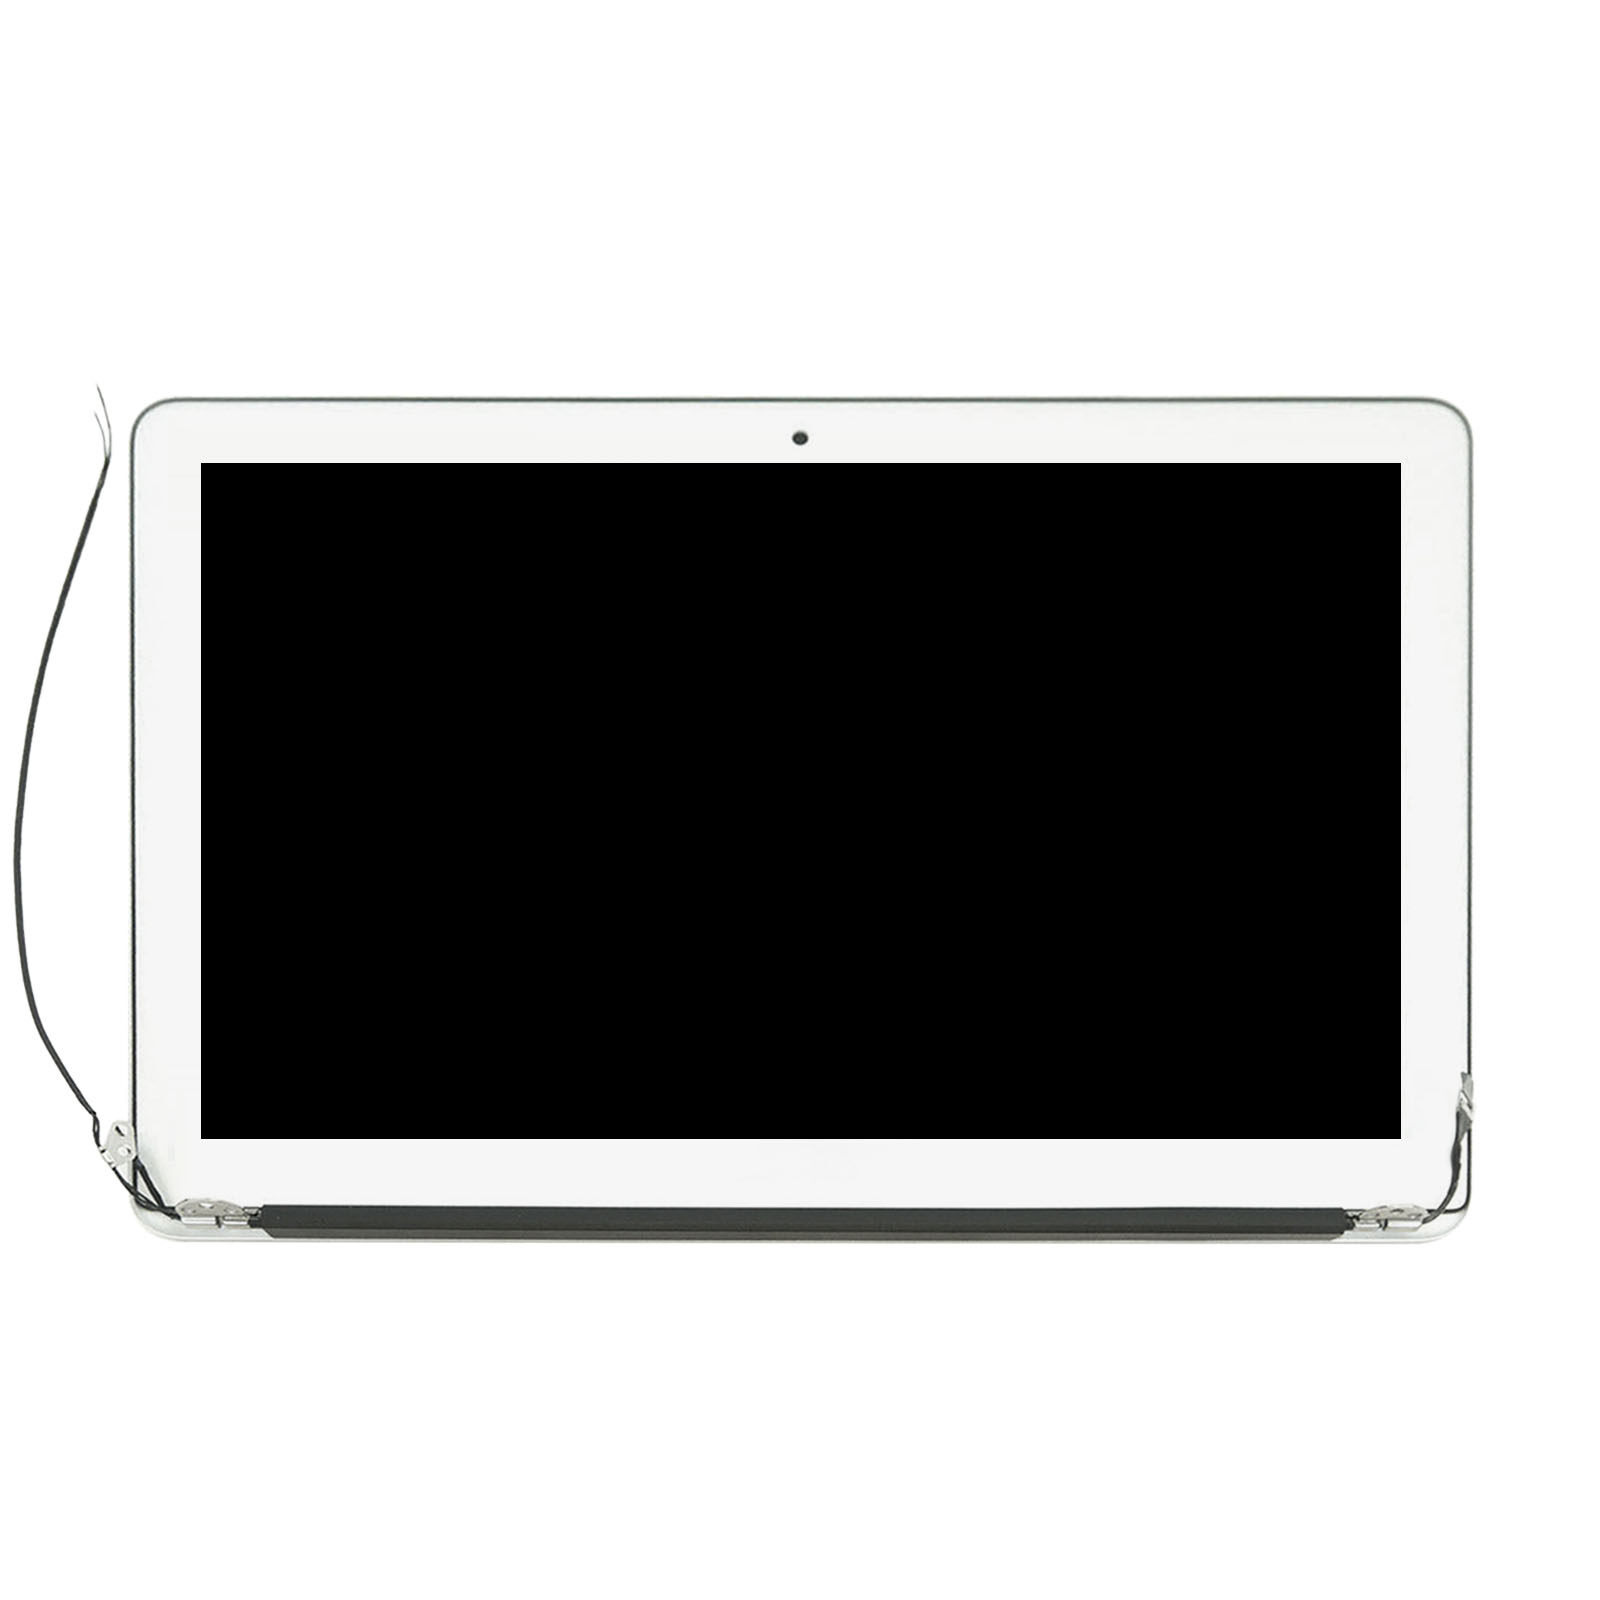 Kreplacement for MacBook Air 13" A1466 Mid 2013 to 2017 LCD LED Full Screen Display Assembly